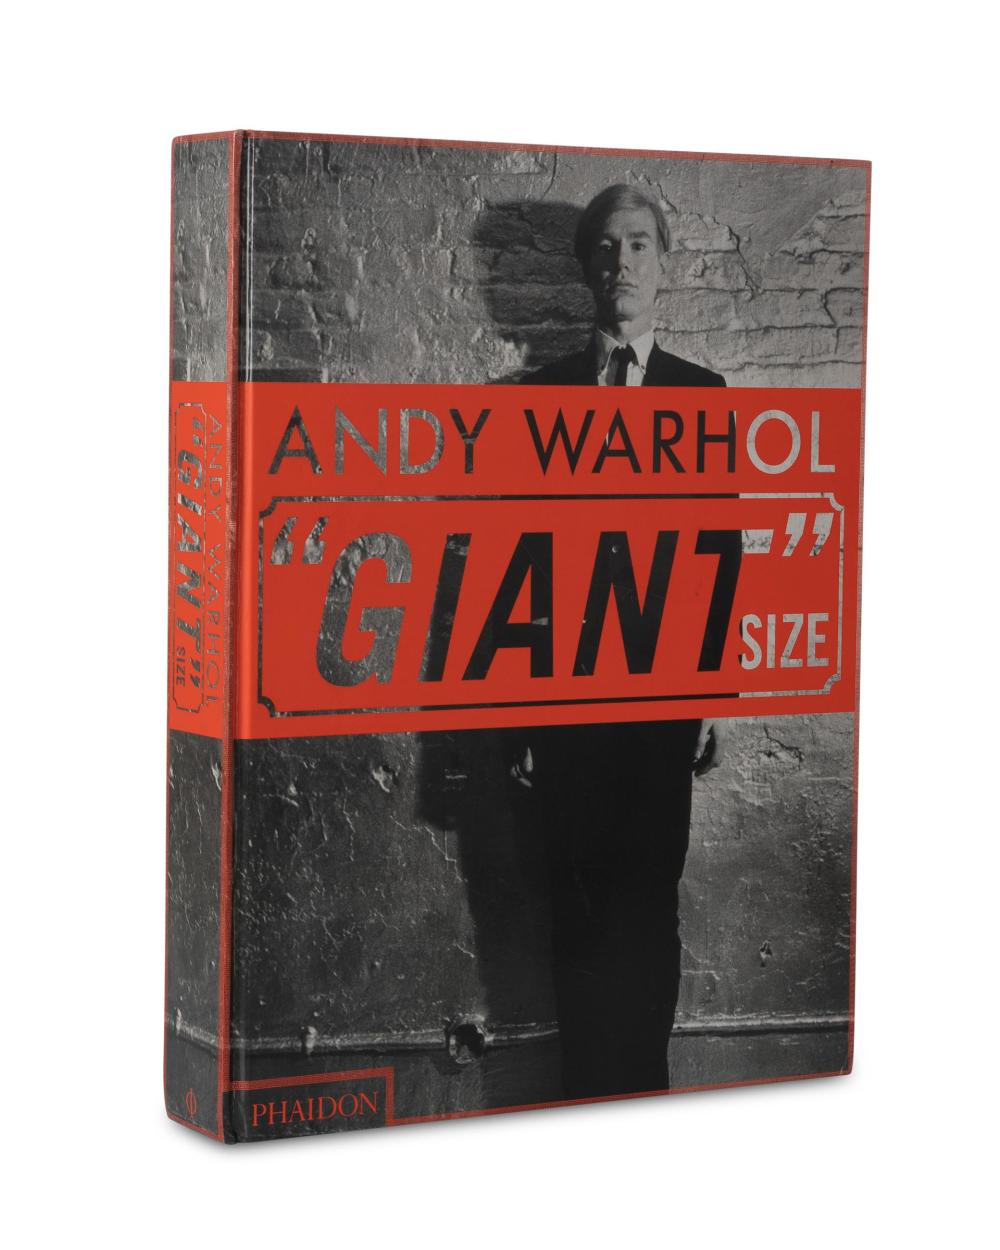  ANDY WARHOL GIANT SIZE Andy 343fa4